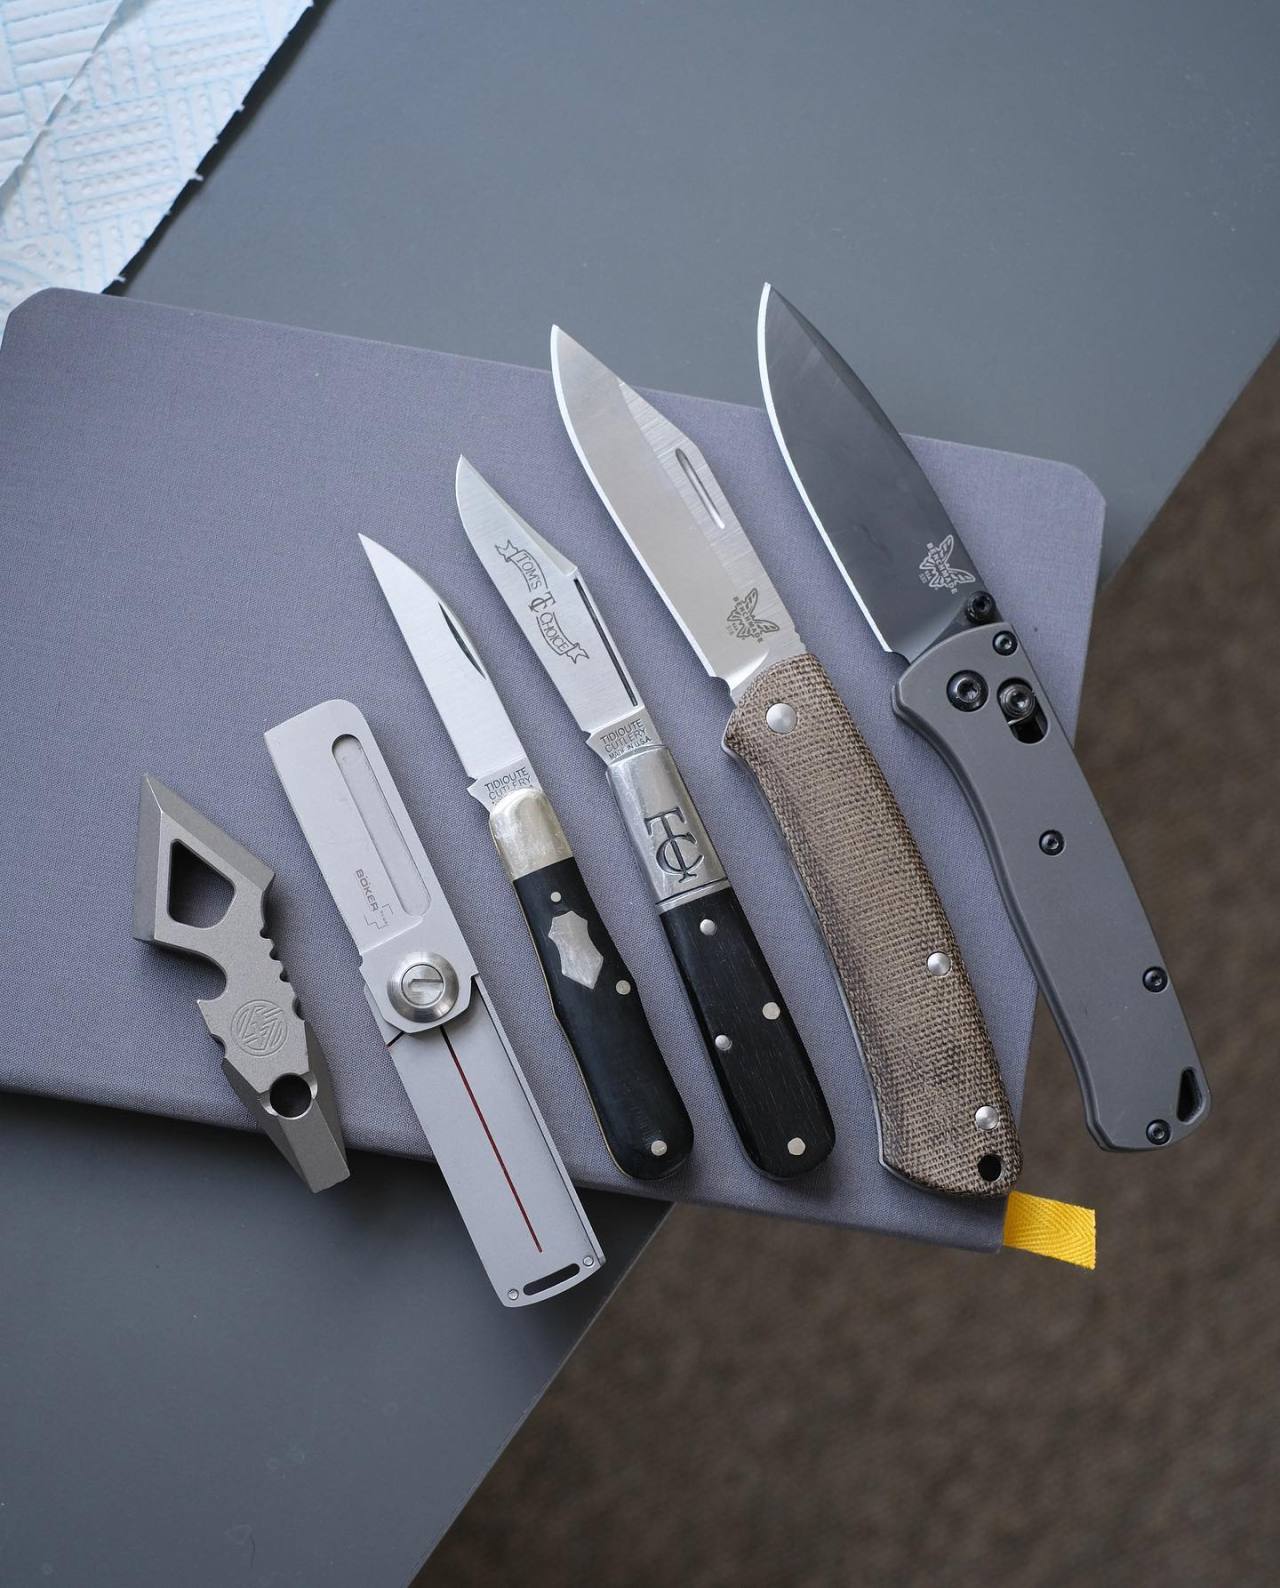 💥💥💥 FOR SALE 💥💥💥
- Apache v2 Ti from 4t5design. £48
- Boker Rocket. Heinnie Haynes. £17
- GEC 06. custom scales & liners. £175
- GEC 14 SFO Toms choice barlow. £195
- First run Benchmade proper 318. £80
- Benchmade mini bugout with Ti scales from...